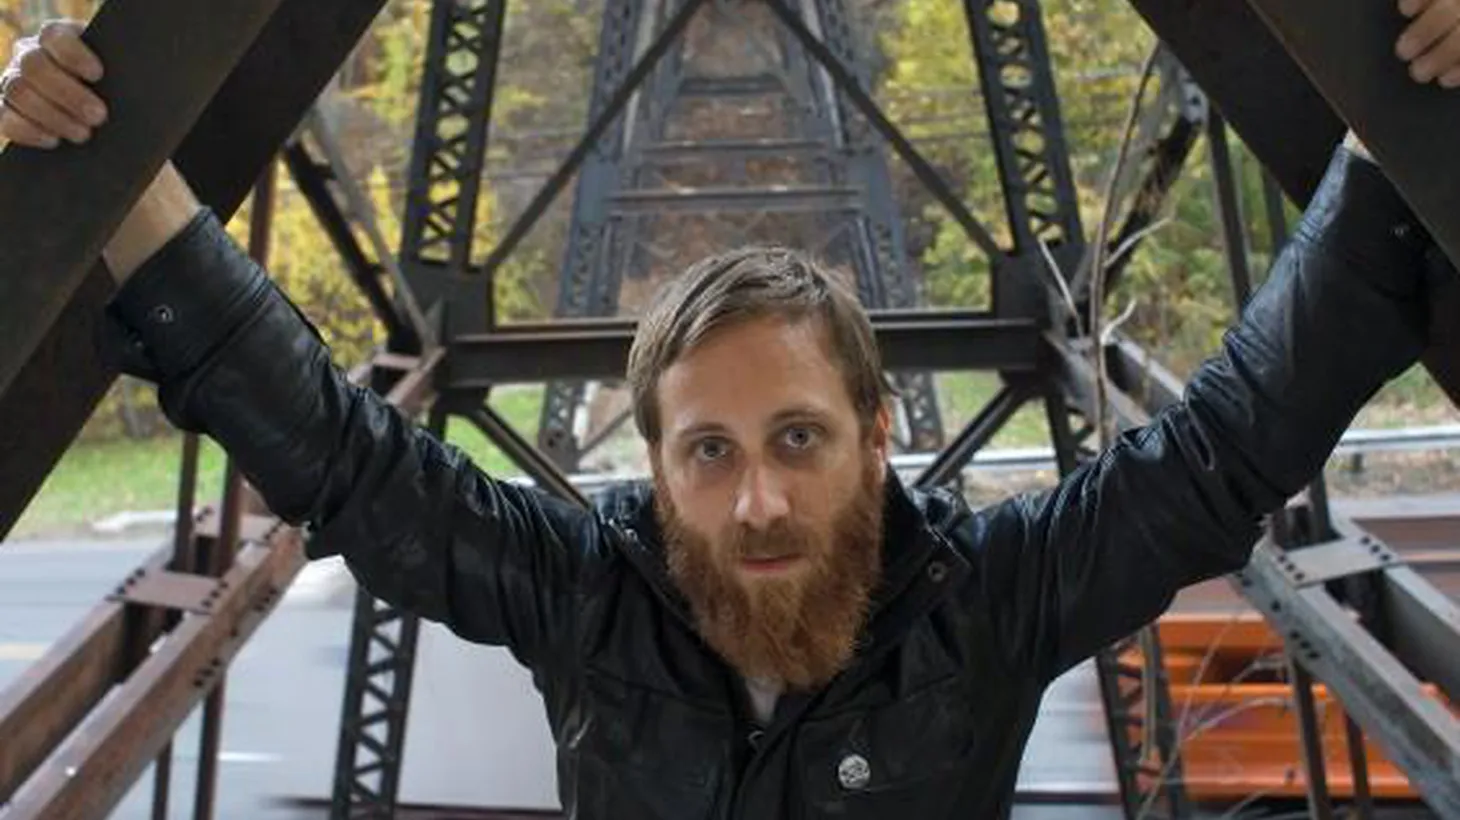 Dan Auerbach of The Black Keys does his solo thing on Morning Becomes Eclectic at 11:15am.